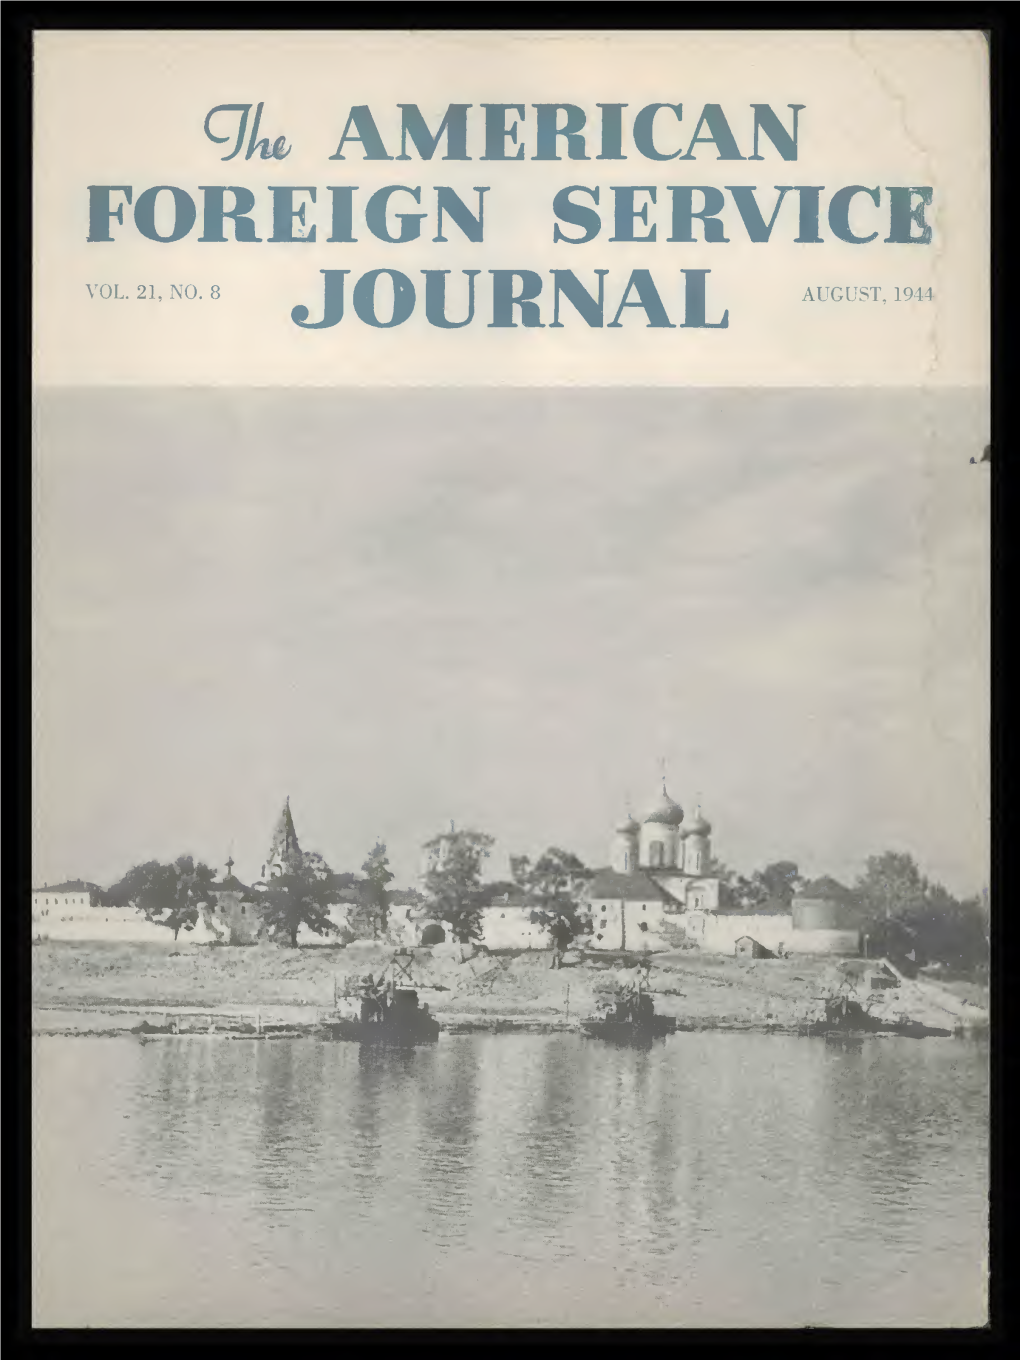 The Foreign Service Journal, August 1944